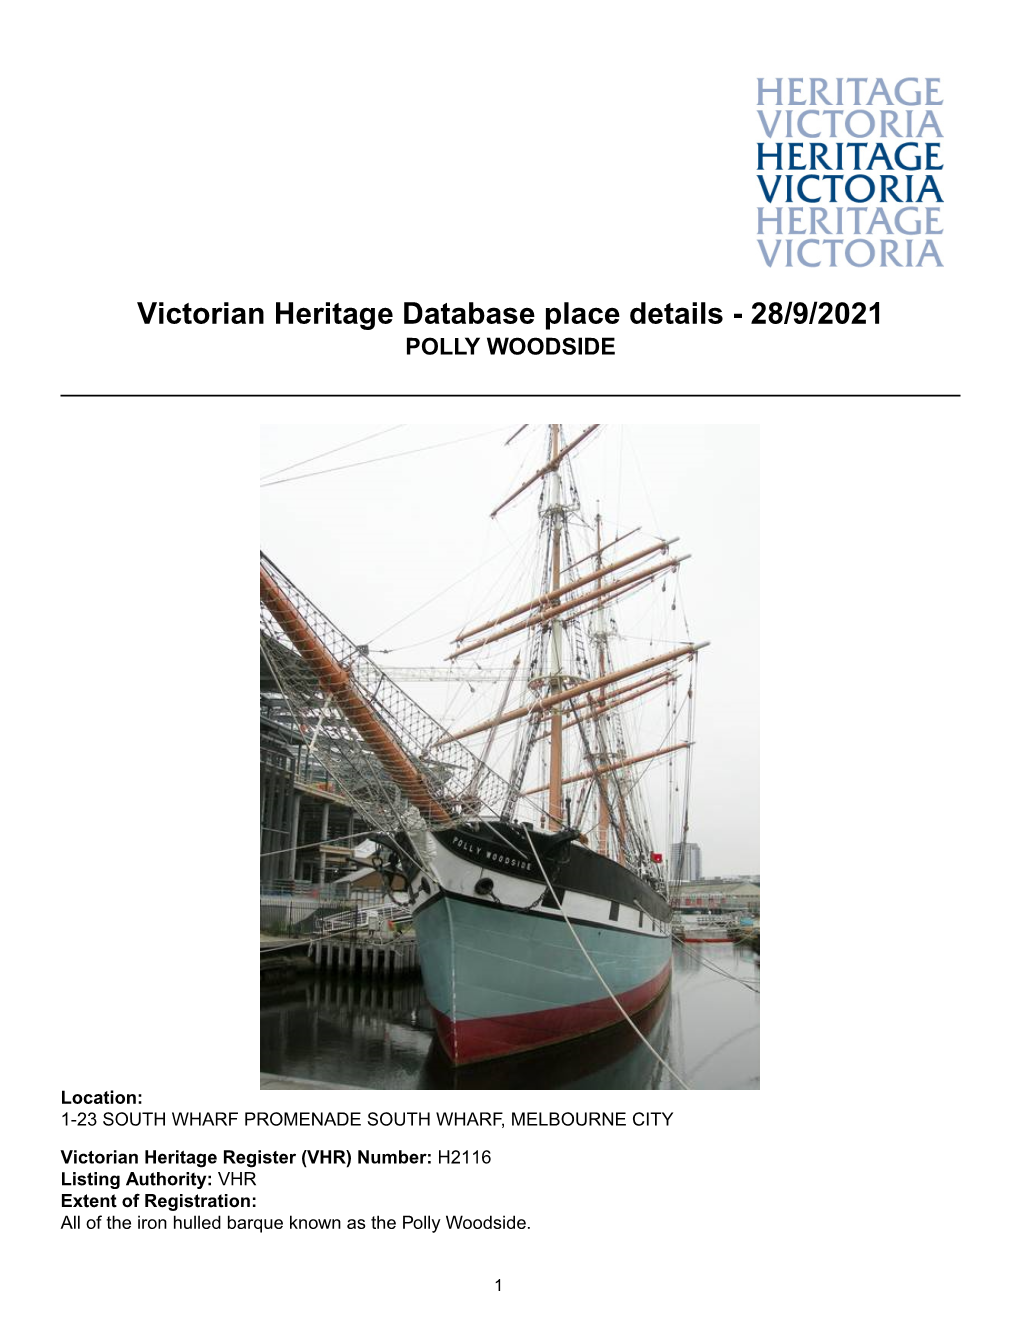 Victorian Heritage Database Place Details - 28/9/2021 POLLY WOODSIDE